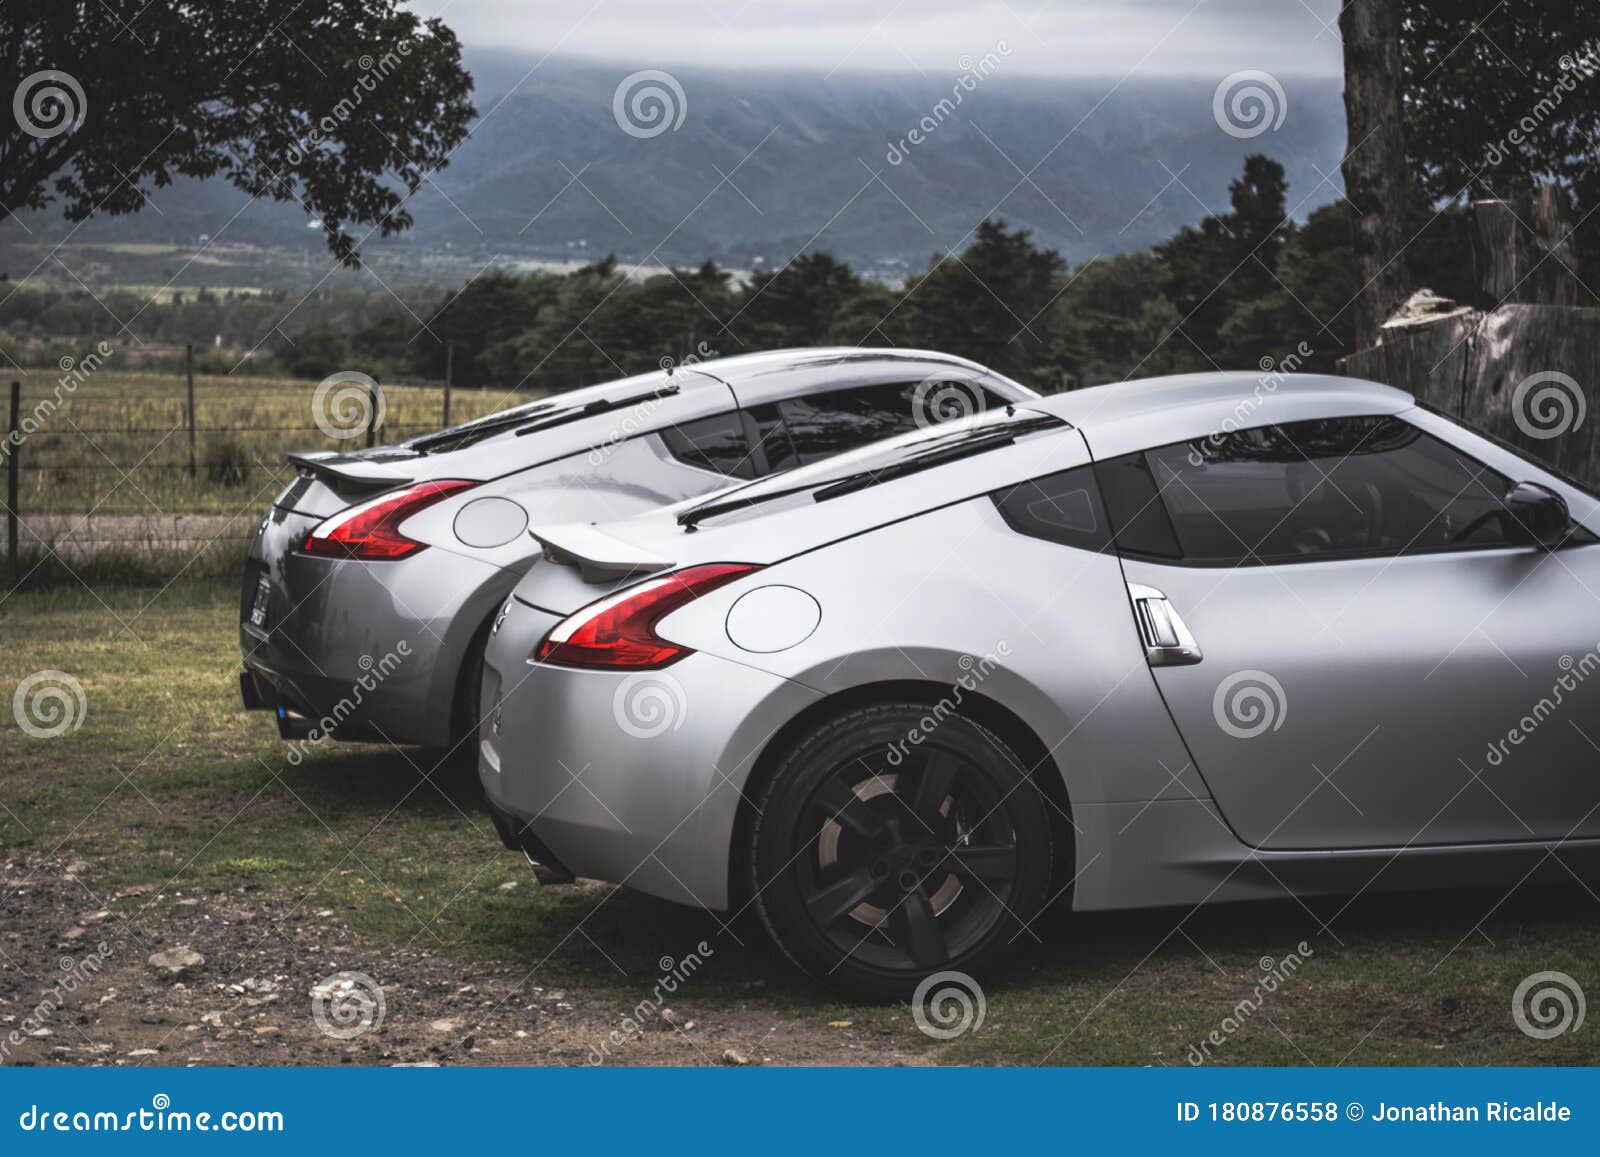 Two Silver Japanese Sports Cars In Nature Landscape Cordoba Argentina Editorial Stock Photo Image Of Wheel Tree